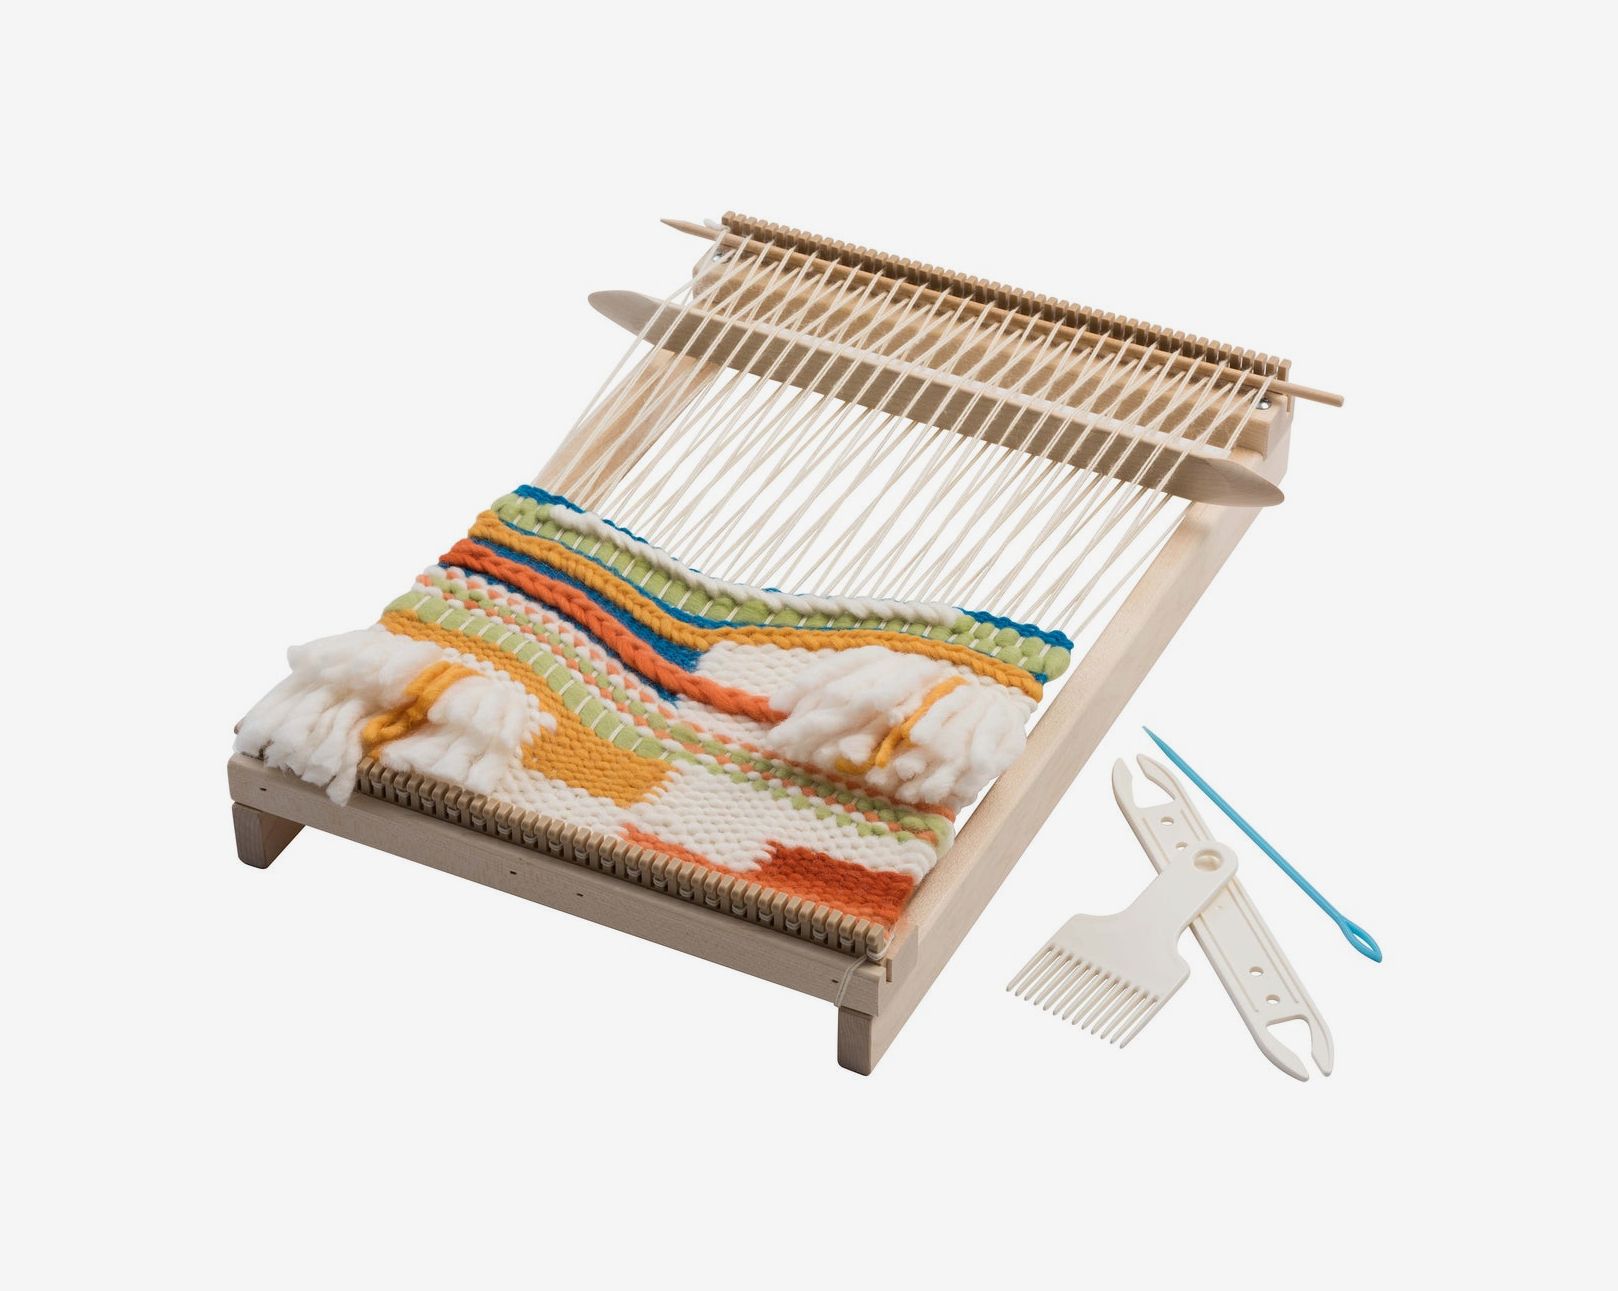 Weaving Loom Learn To Weave Scarf Knitting Machine Knitting Loom Knit Hobby  Tool Kits with Knitting Wool Yarn Child Educational Toys Craft Needlework